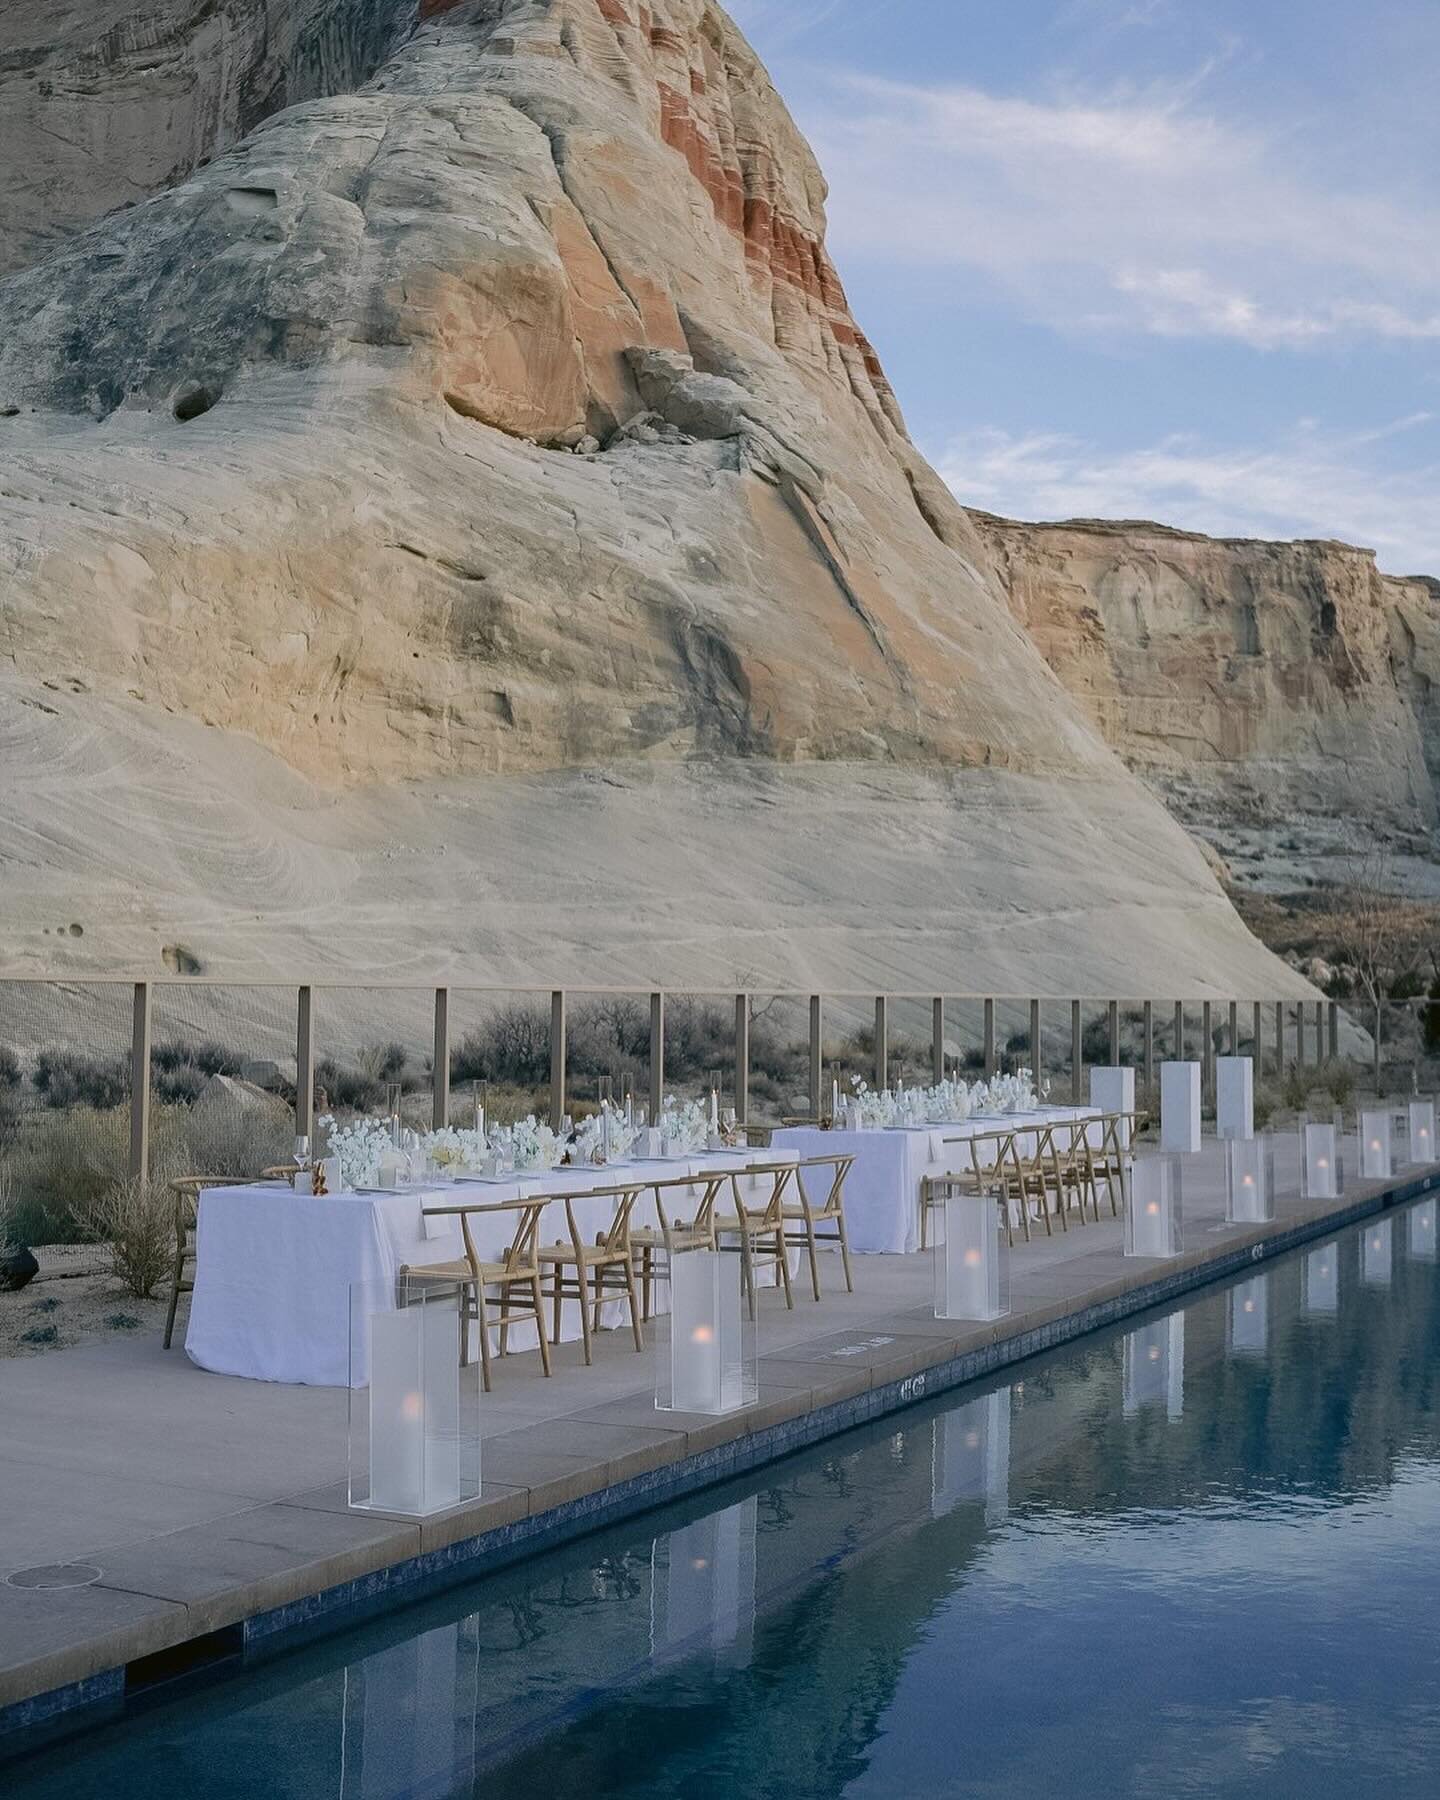 IN THE DESERT.

Picture-perfect moments unfold in the desert mountains, creating a wedding experience that captures the best of nature&rsquo;s neutral palette. With every detail meticulously curated, from the inviting ambiance to the cozy seating arr